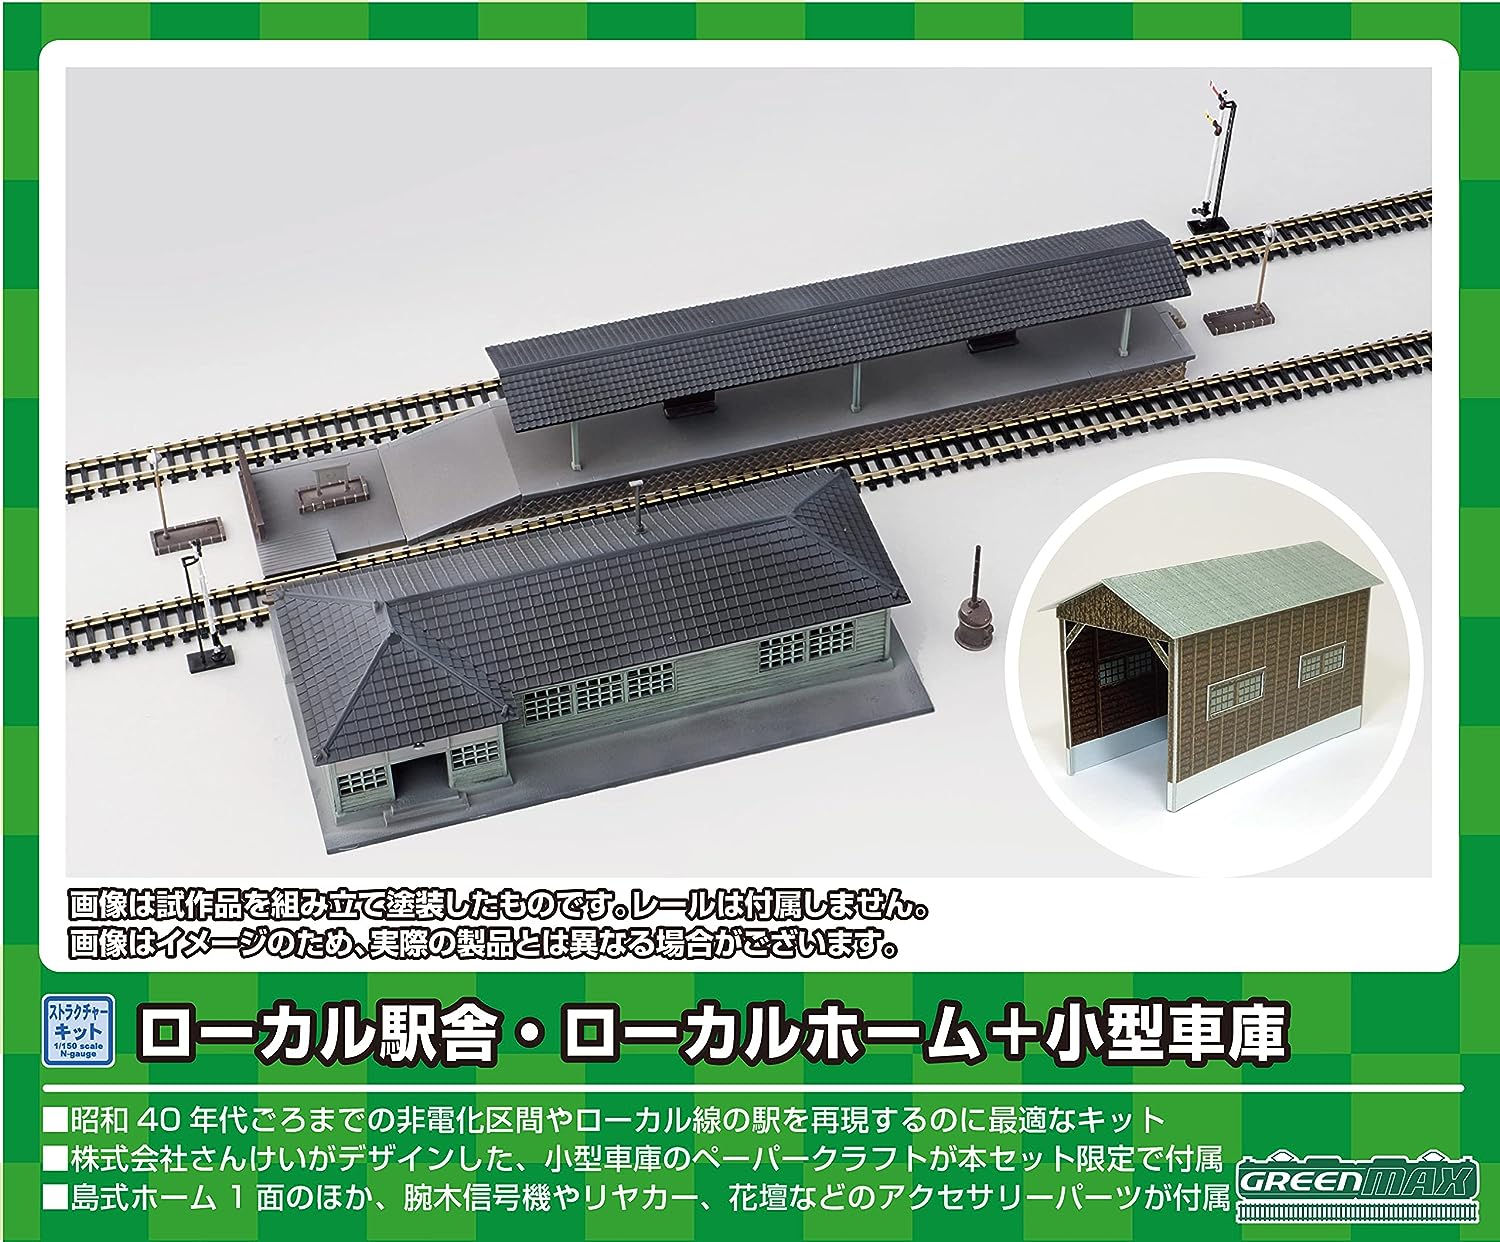 Greenmax 9801 N Gauge Local Station House Local Home + Small Garage Unpainted Unassembled Railway Model Structure - BanzaiHobby